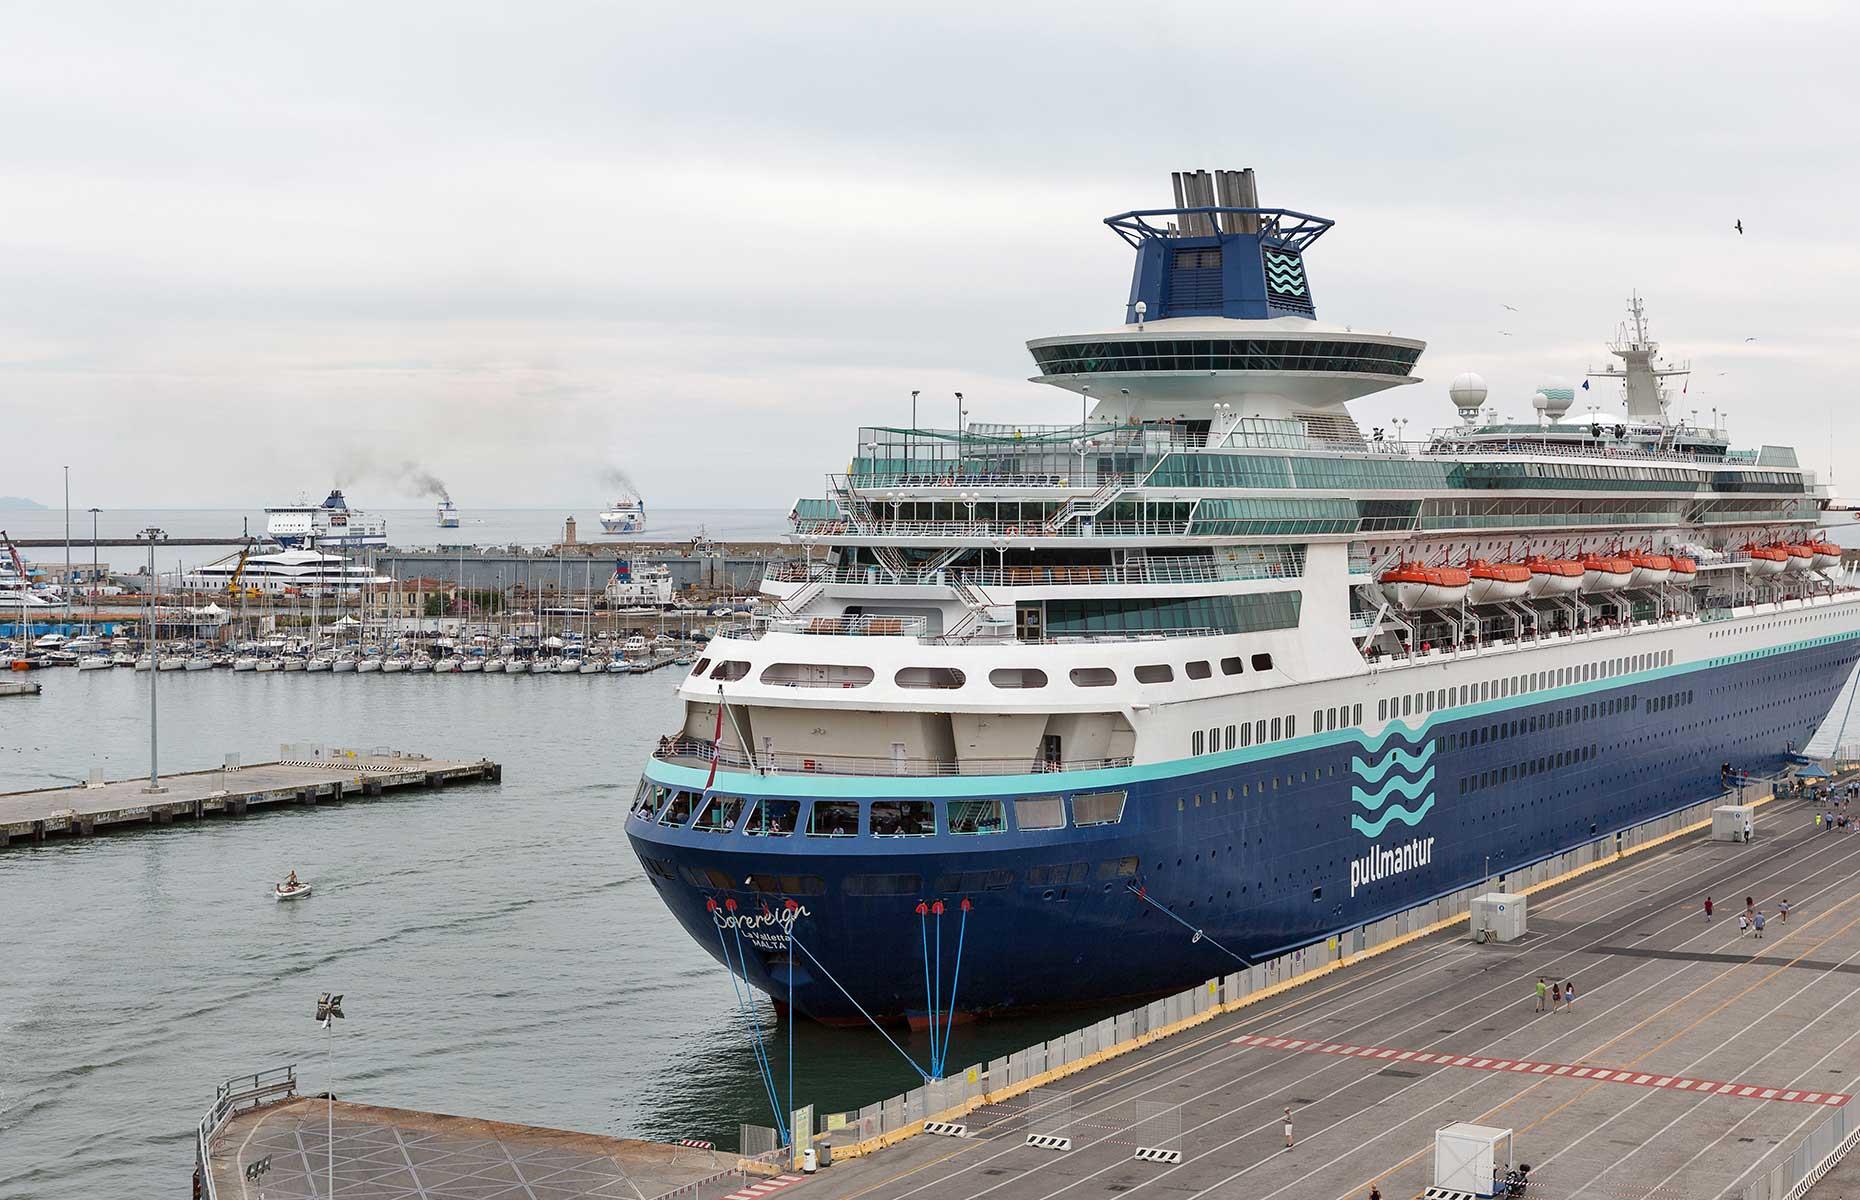 In 2008, the ship was transferred to Pullmantur and renamed MS Sovereign. As a result of the COVID-19 pandemic, Pullmantur requested to be liquidated and Sovereign was beached in Alang next to its sister Monarch, with the scrapping completed in February 2021.